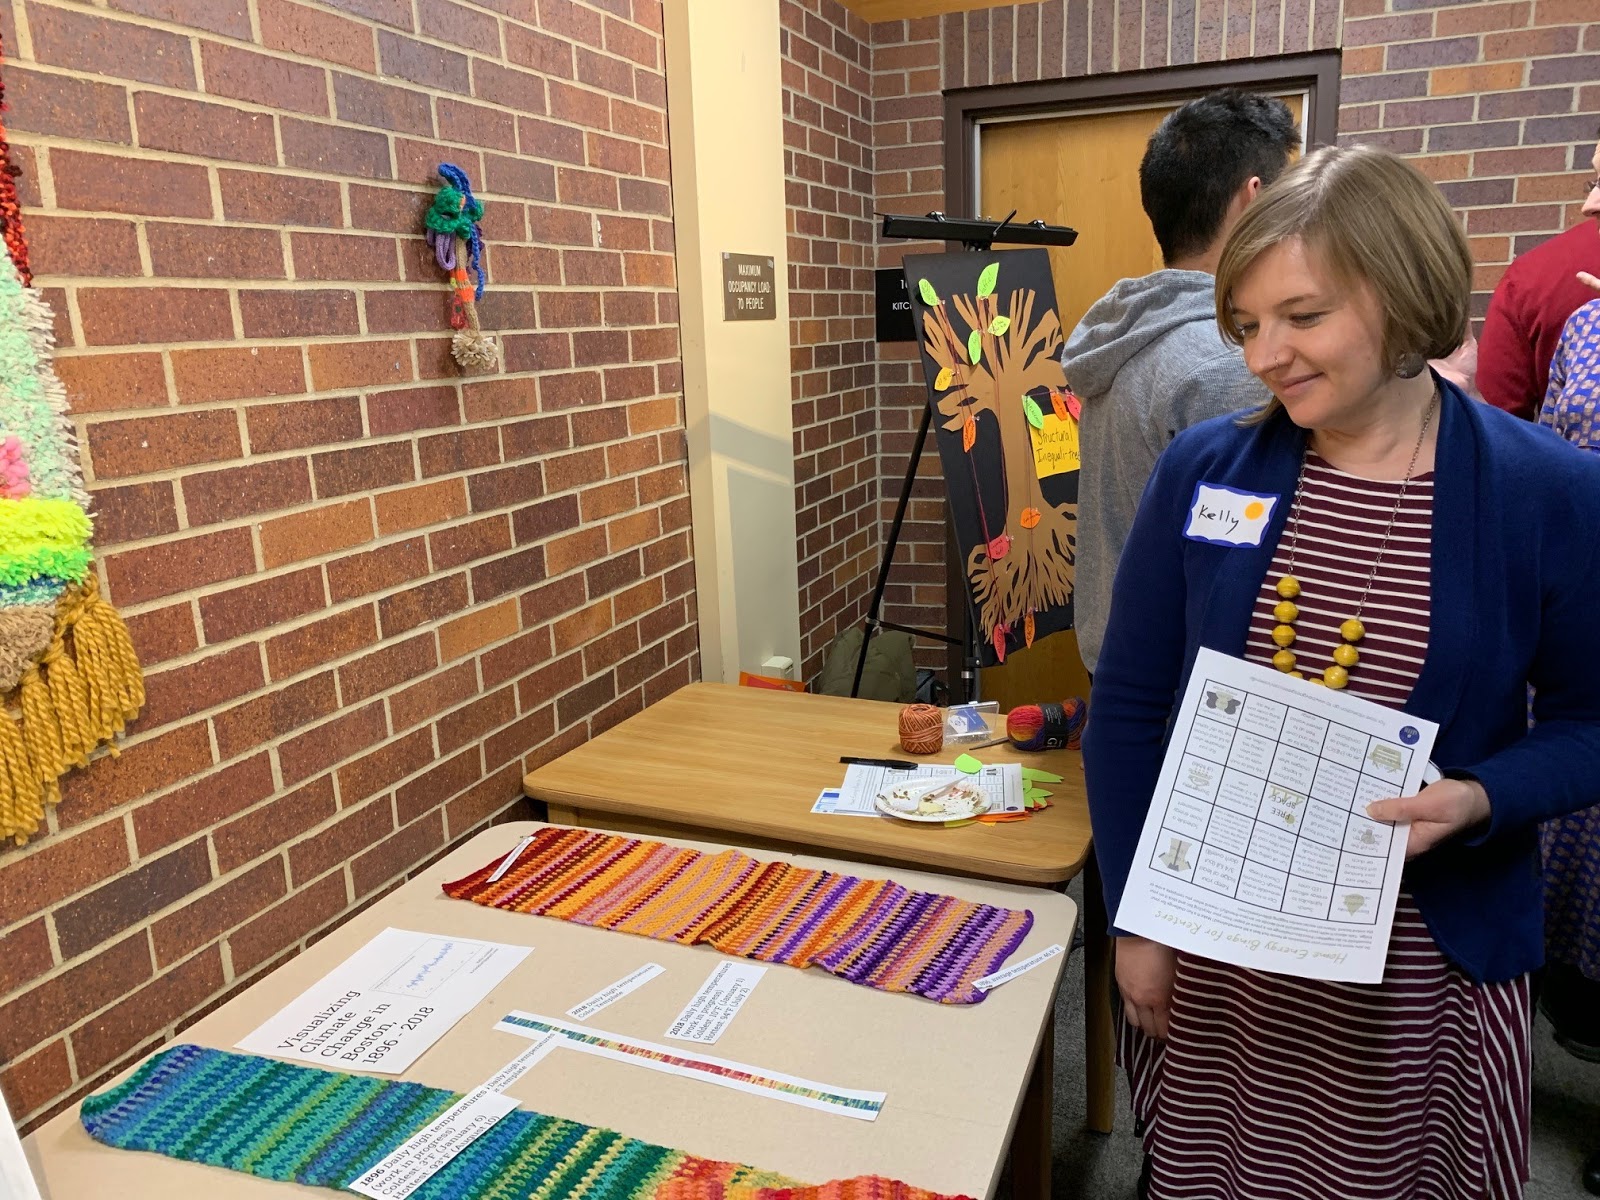 SHS student stands next to her crochet project, showing colorful temperature changes over time